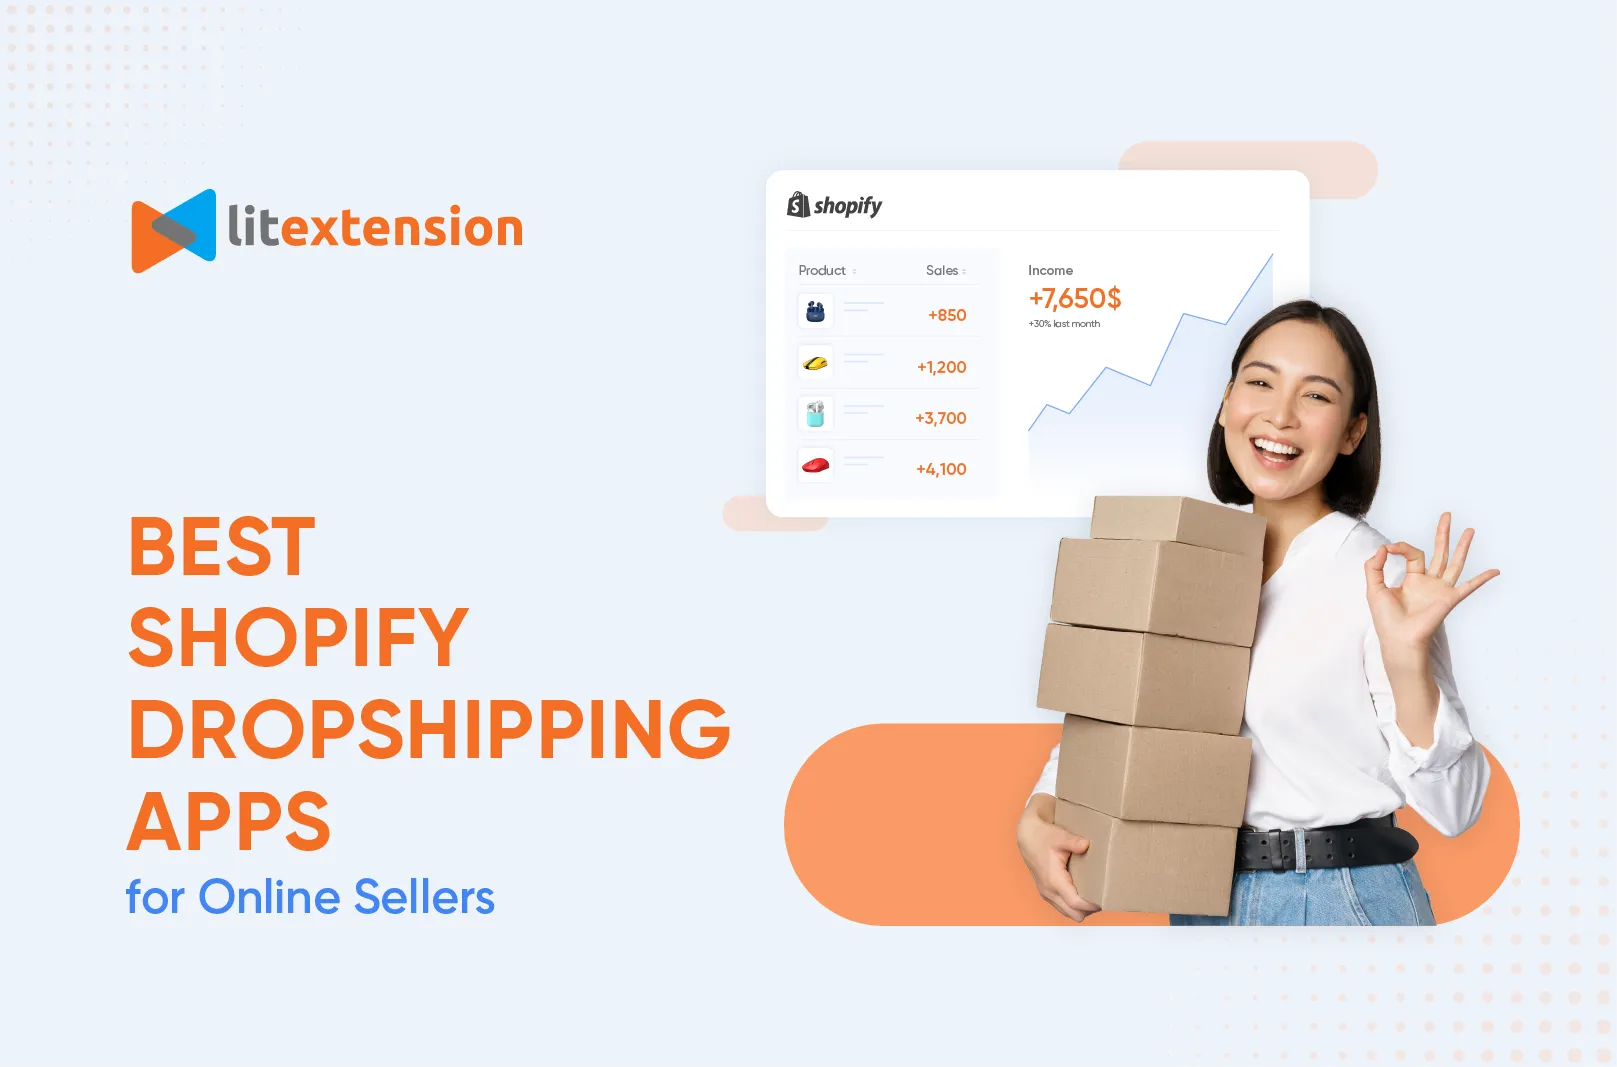 Dropshipping Tools for Business Owners 